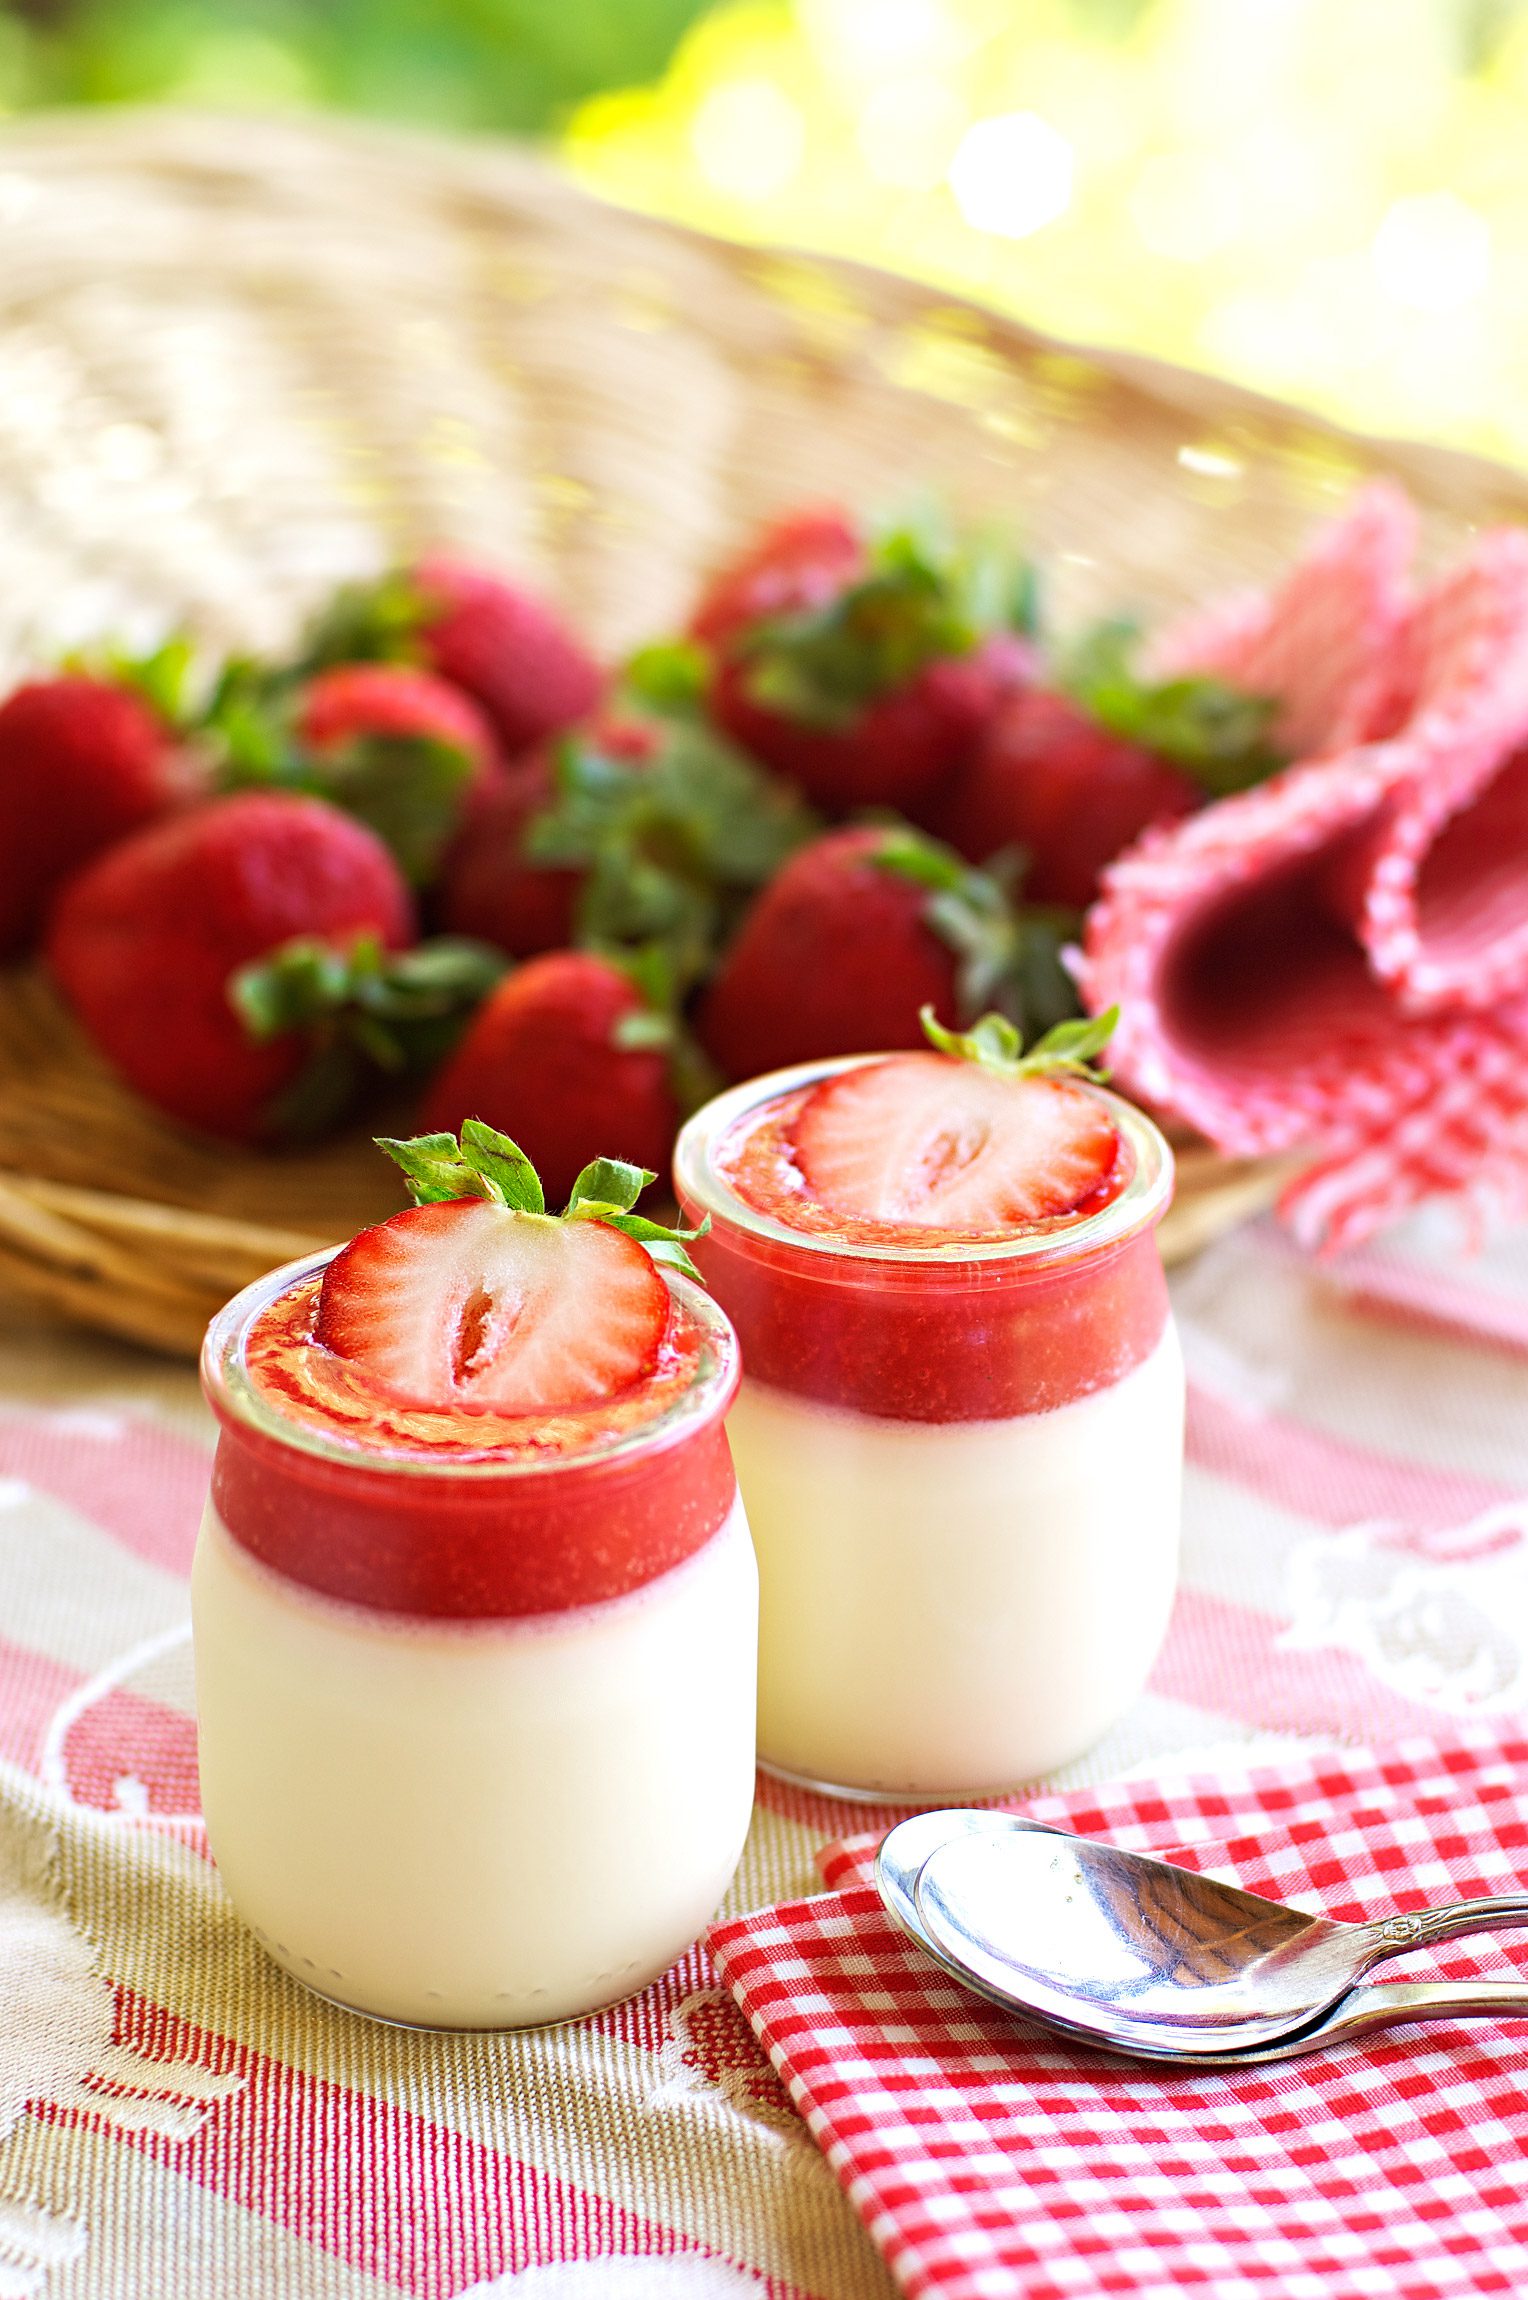 Strawberry-panna-cotta-recipe-photography-and-styling-by-Monica-Schwartz